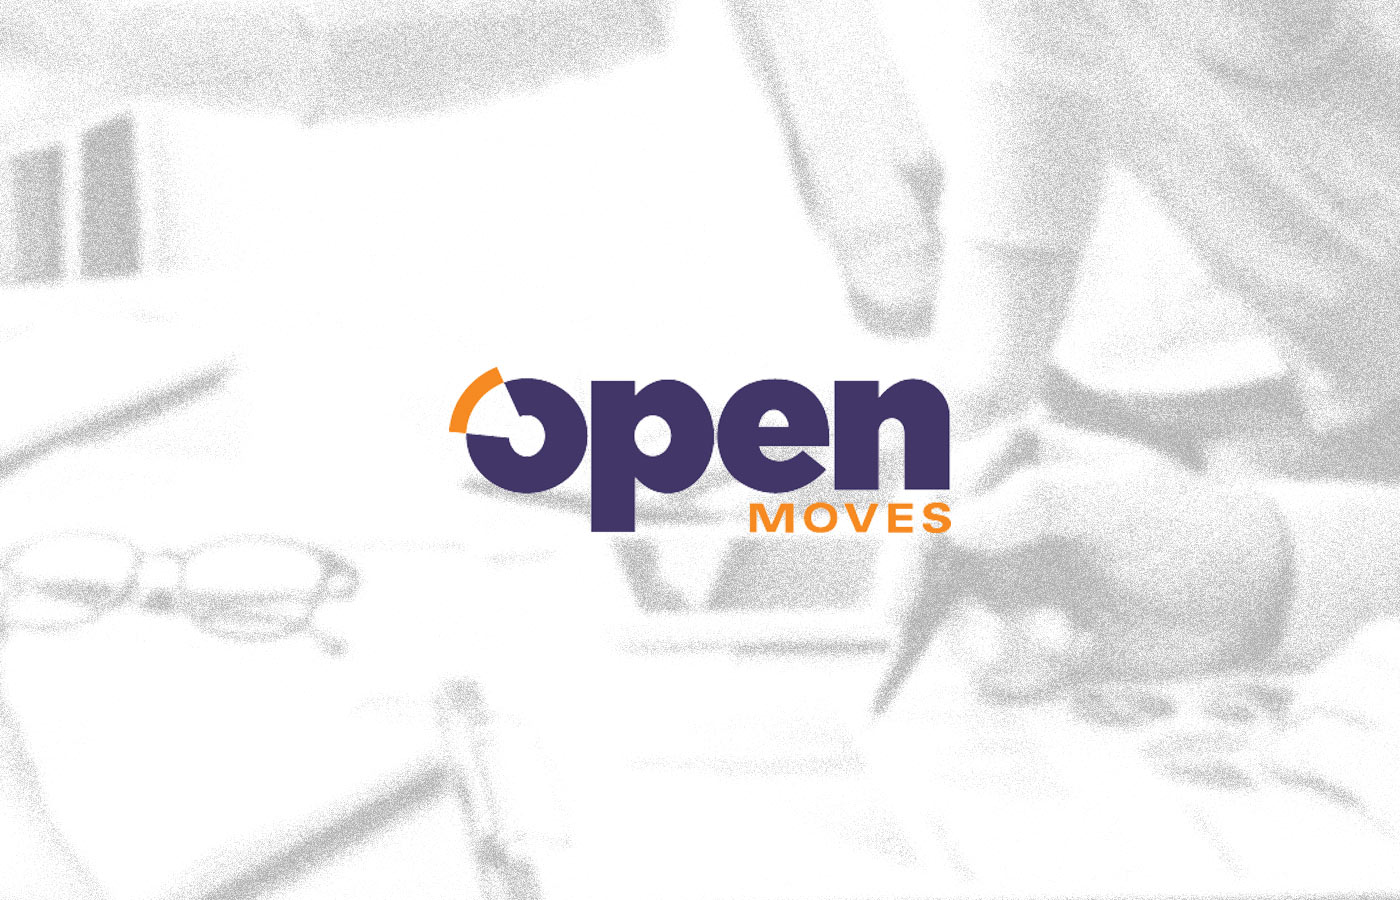 Open Moves logo overlayed on an image of people working in an office